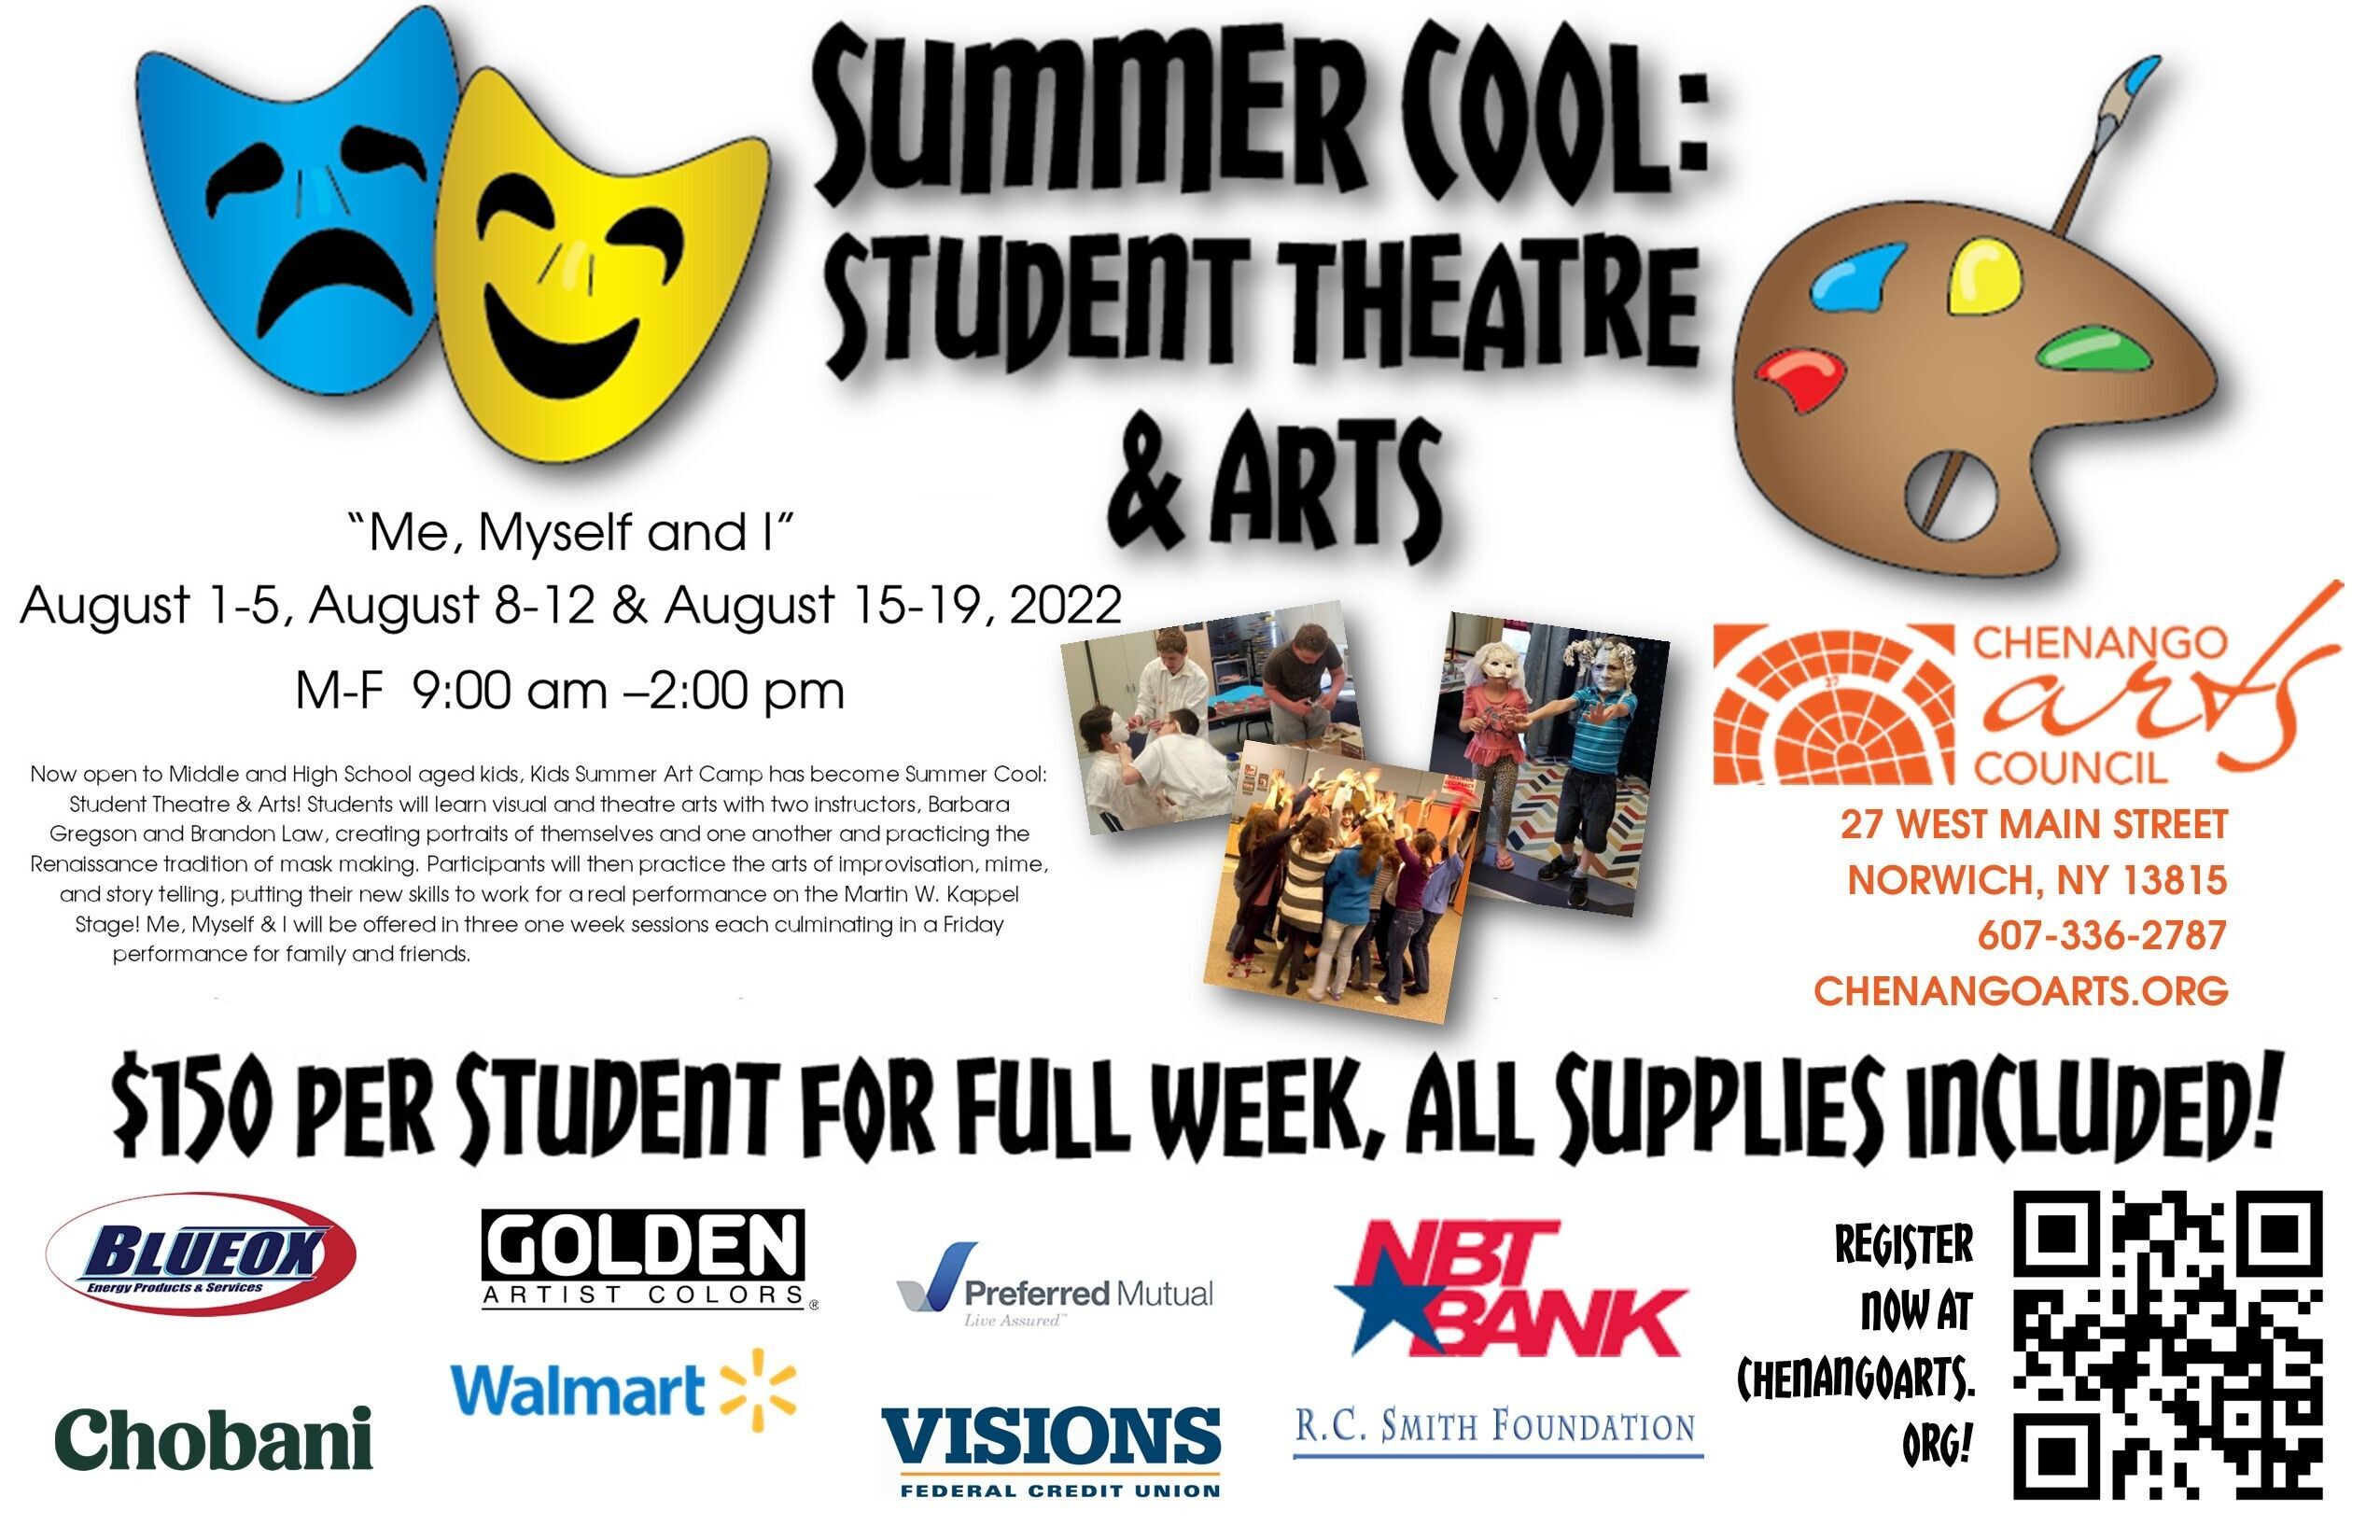 Summer Cool: Student Theatre And Arts